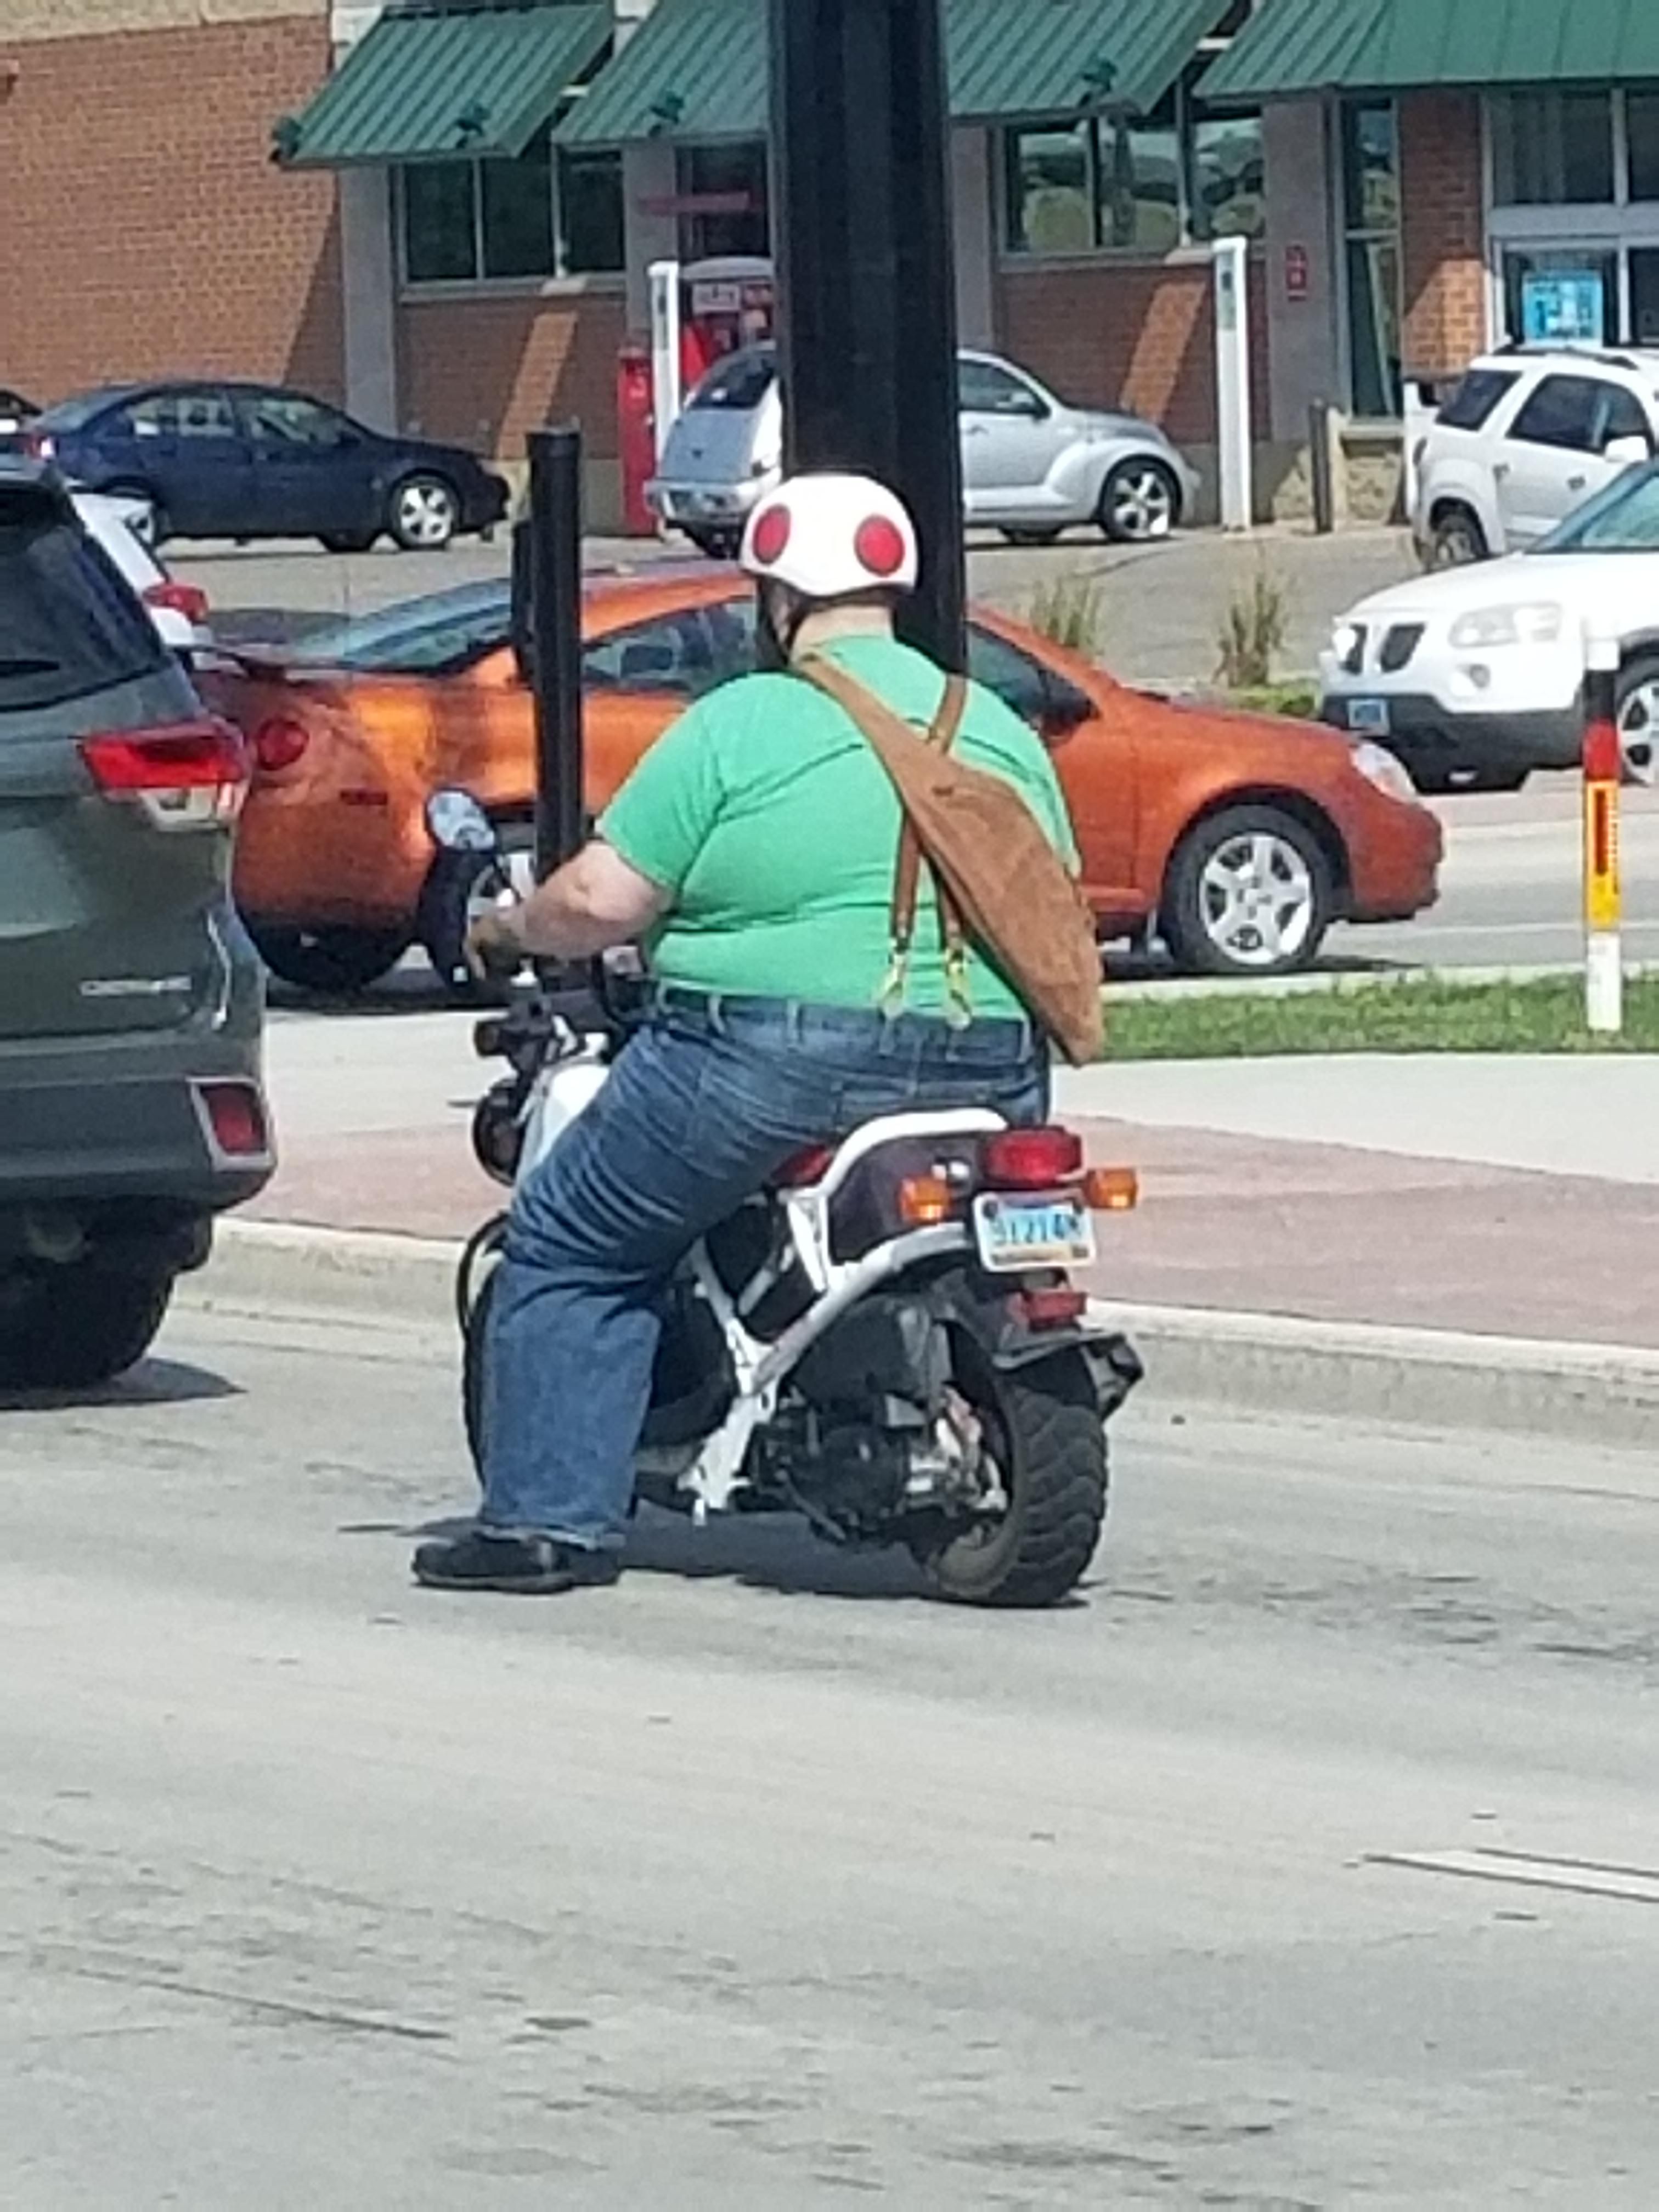 I found Toad from Mario Kart, ready to race.